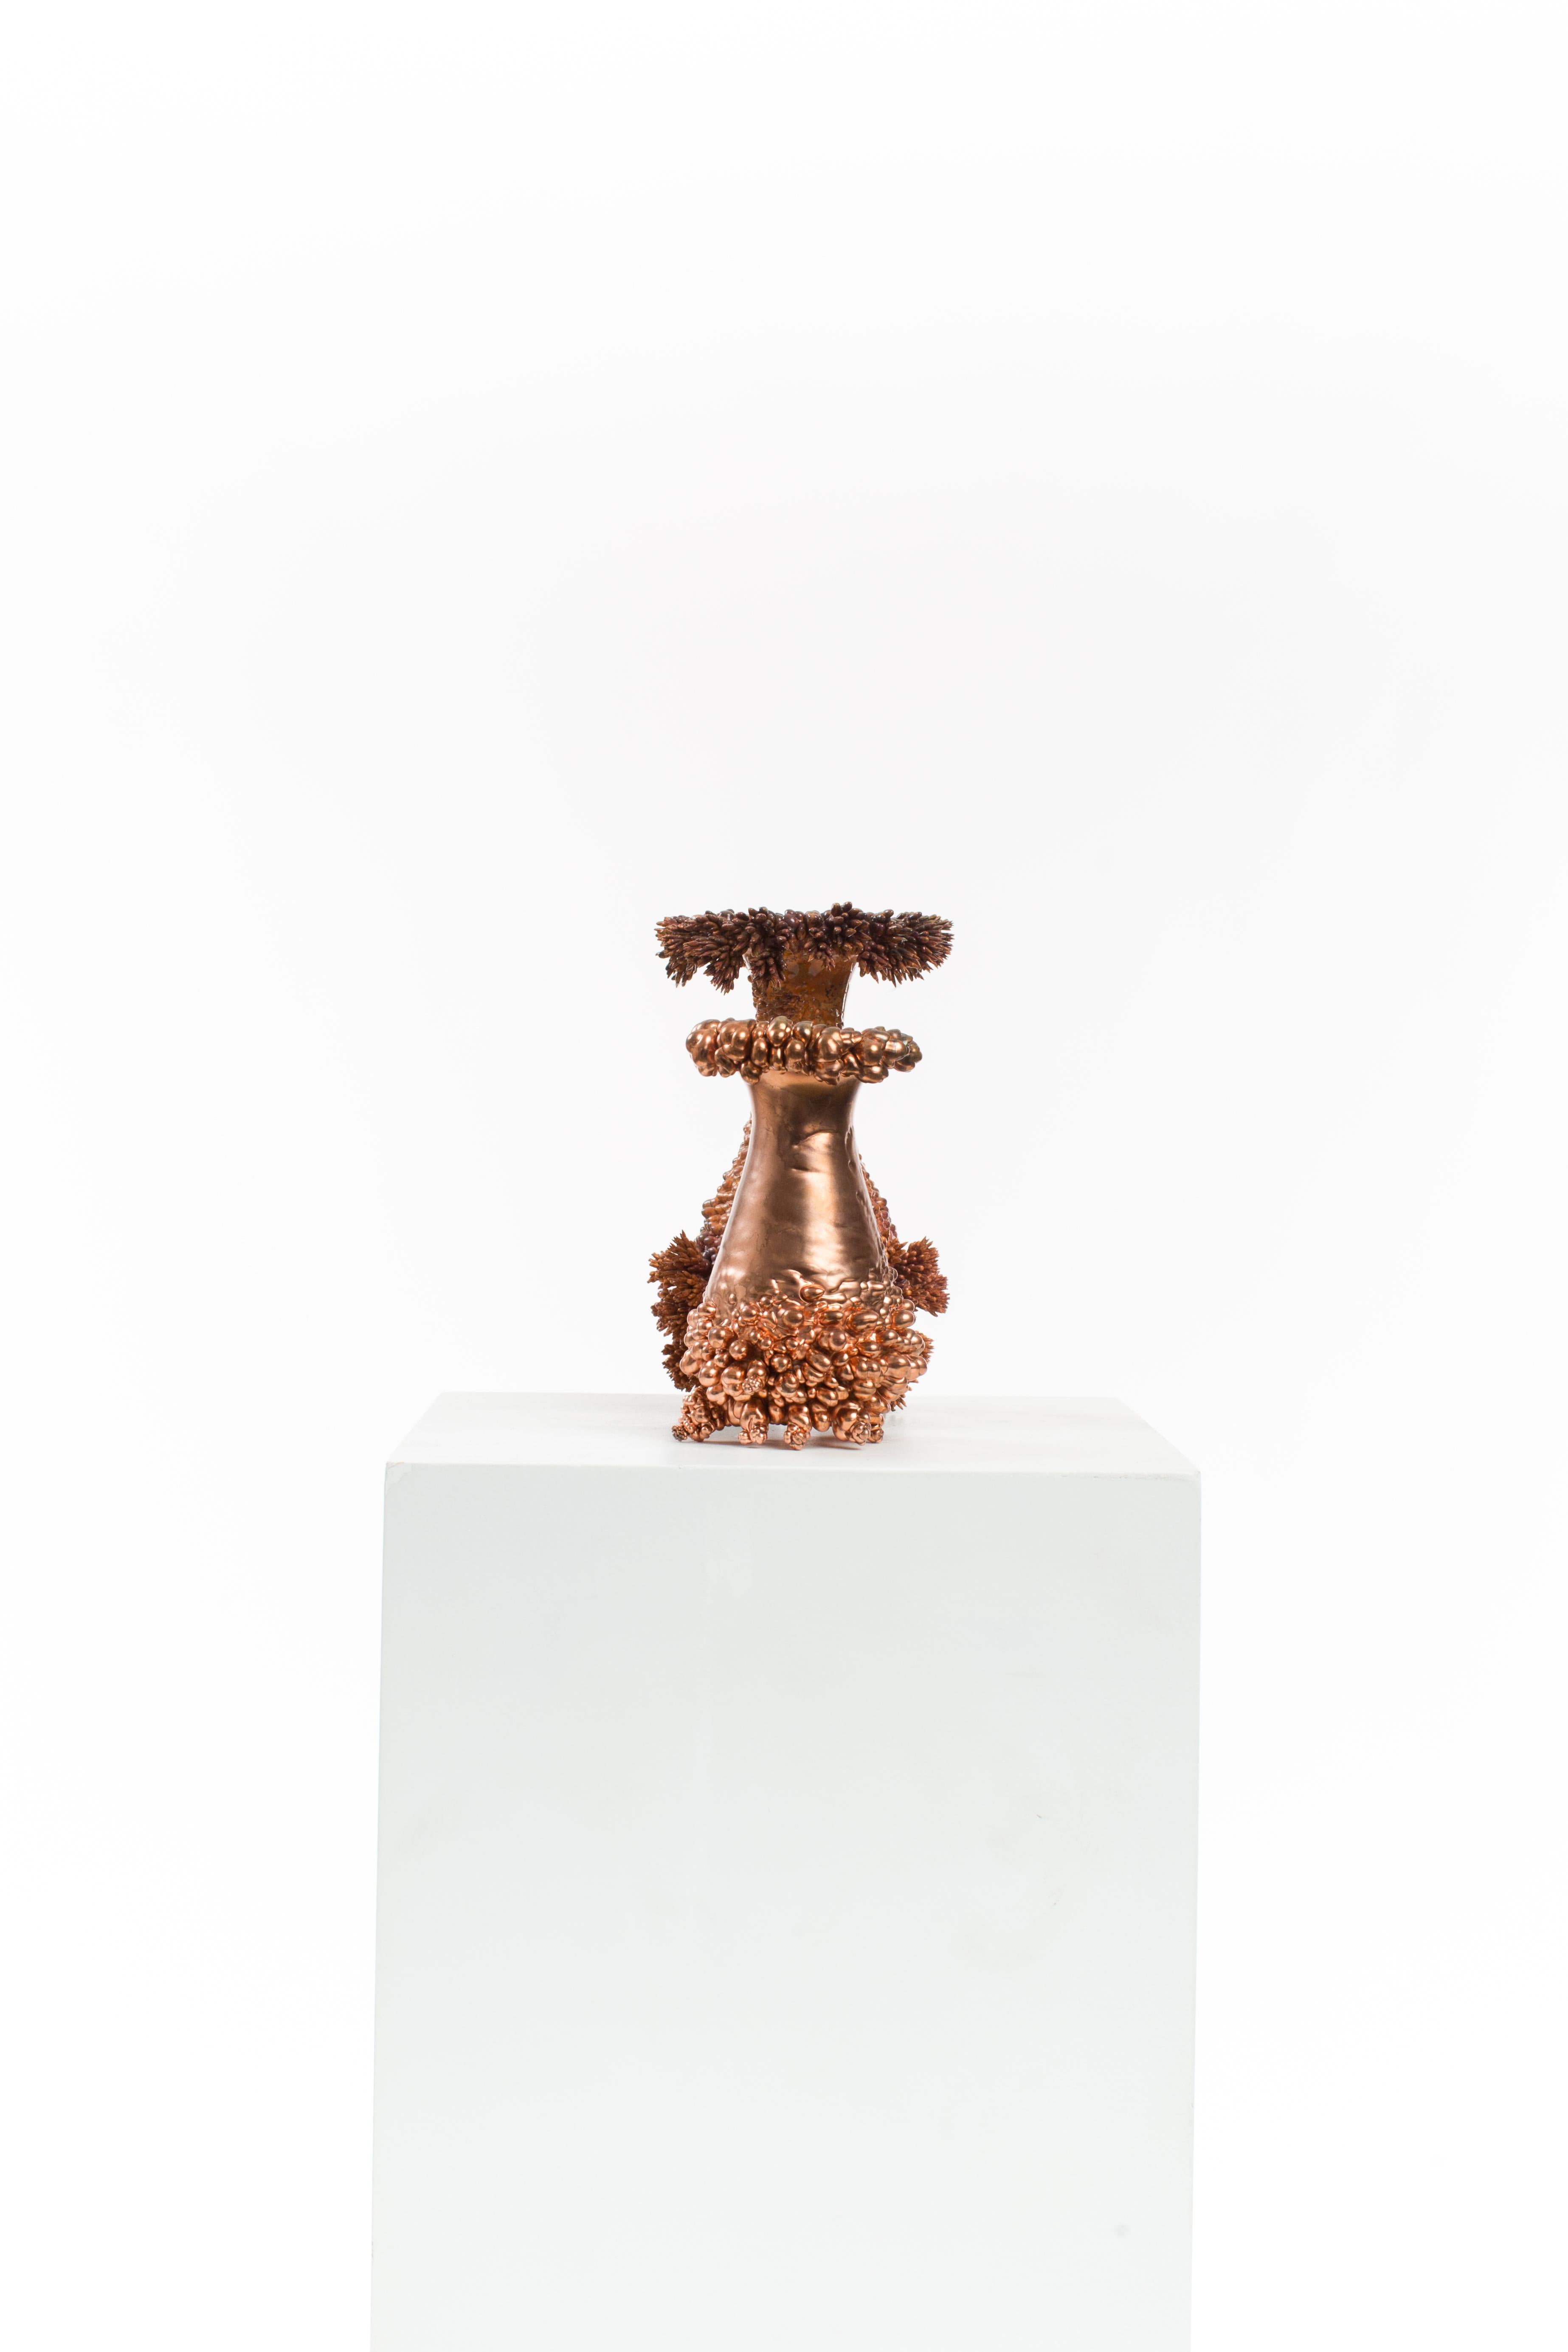 “Chance Encounter” Calcified Vessel 008 
1/1 
Copper 
1. 6cm Ø x 10.5cm 
2. 9cm Ø x 14cm 
1.5Kg 
€850 
2022

Born in Johannesburg in 1991, sculptor Driaan Claassen first studied 3D animation before apprenticing with Otto du Plessis, artist and